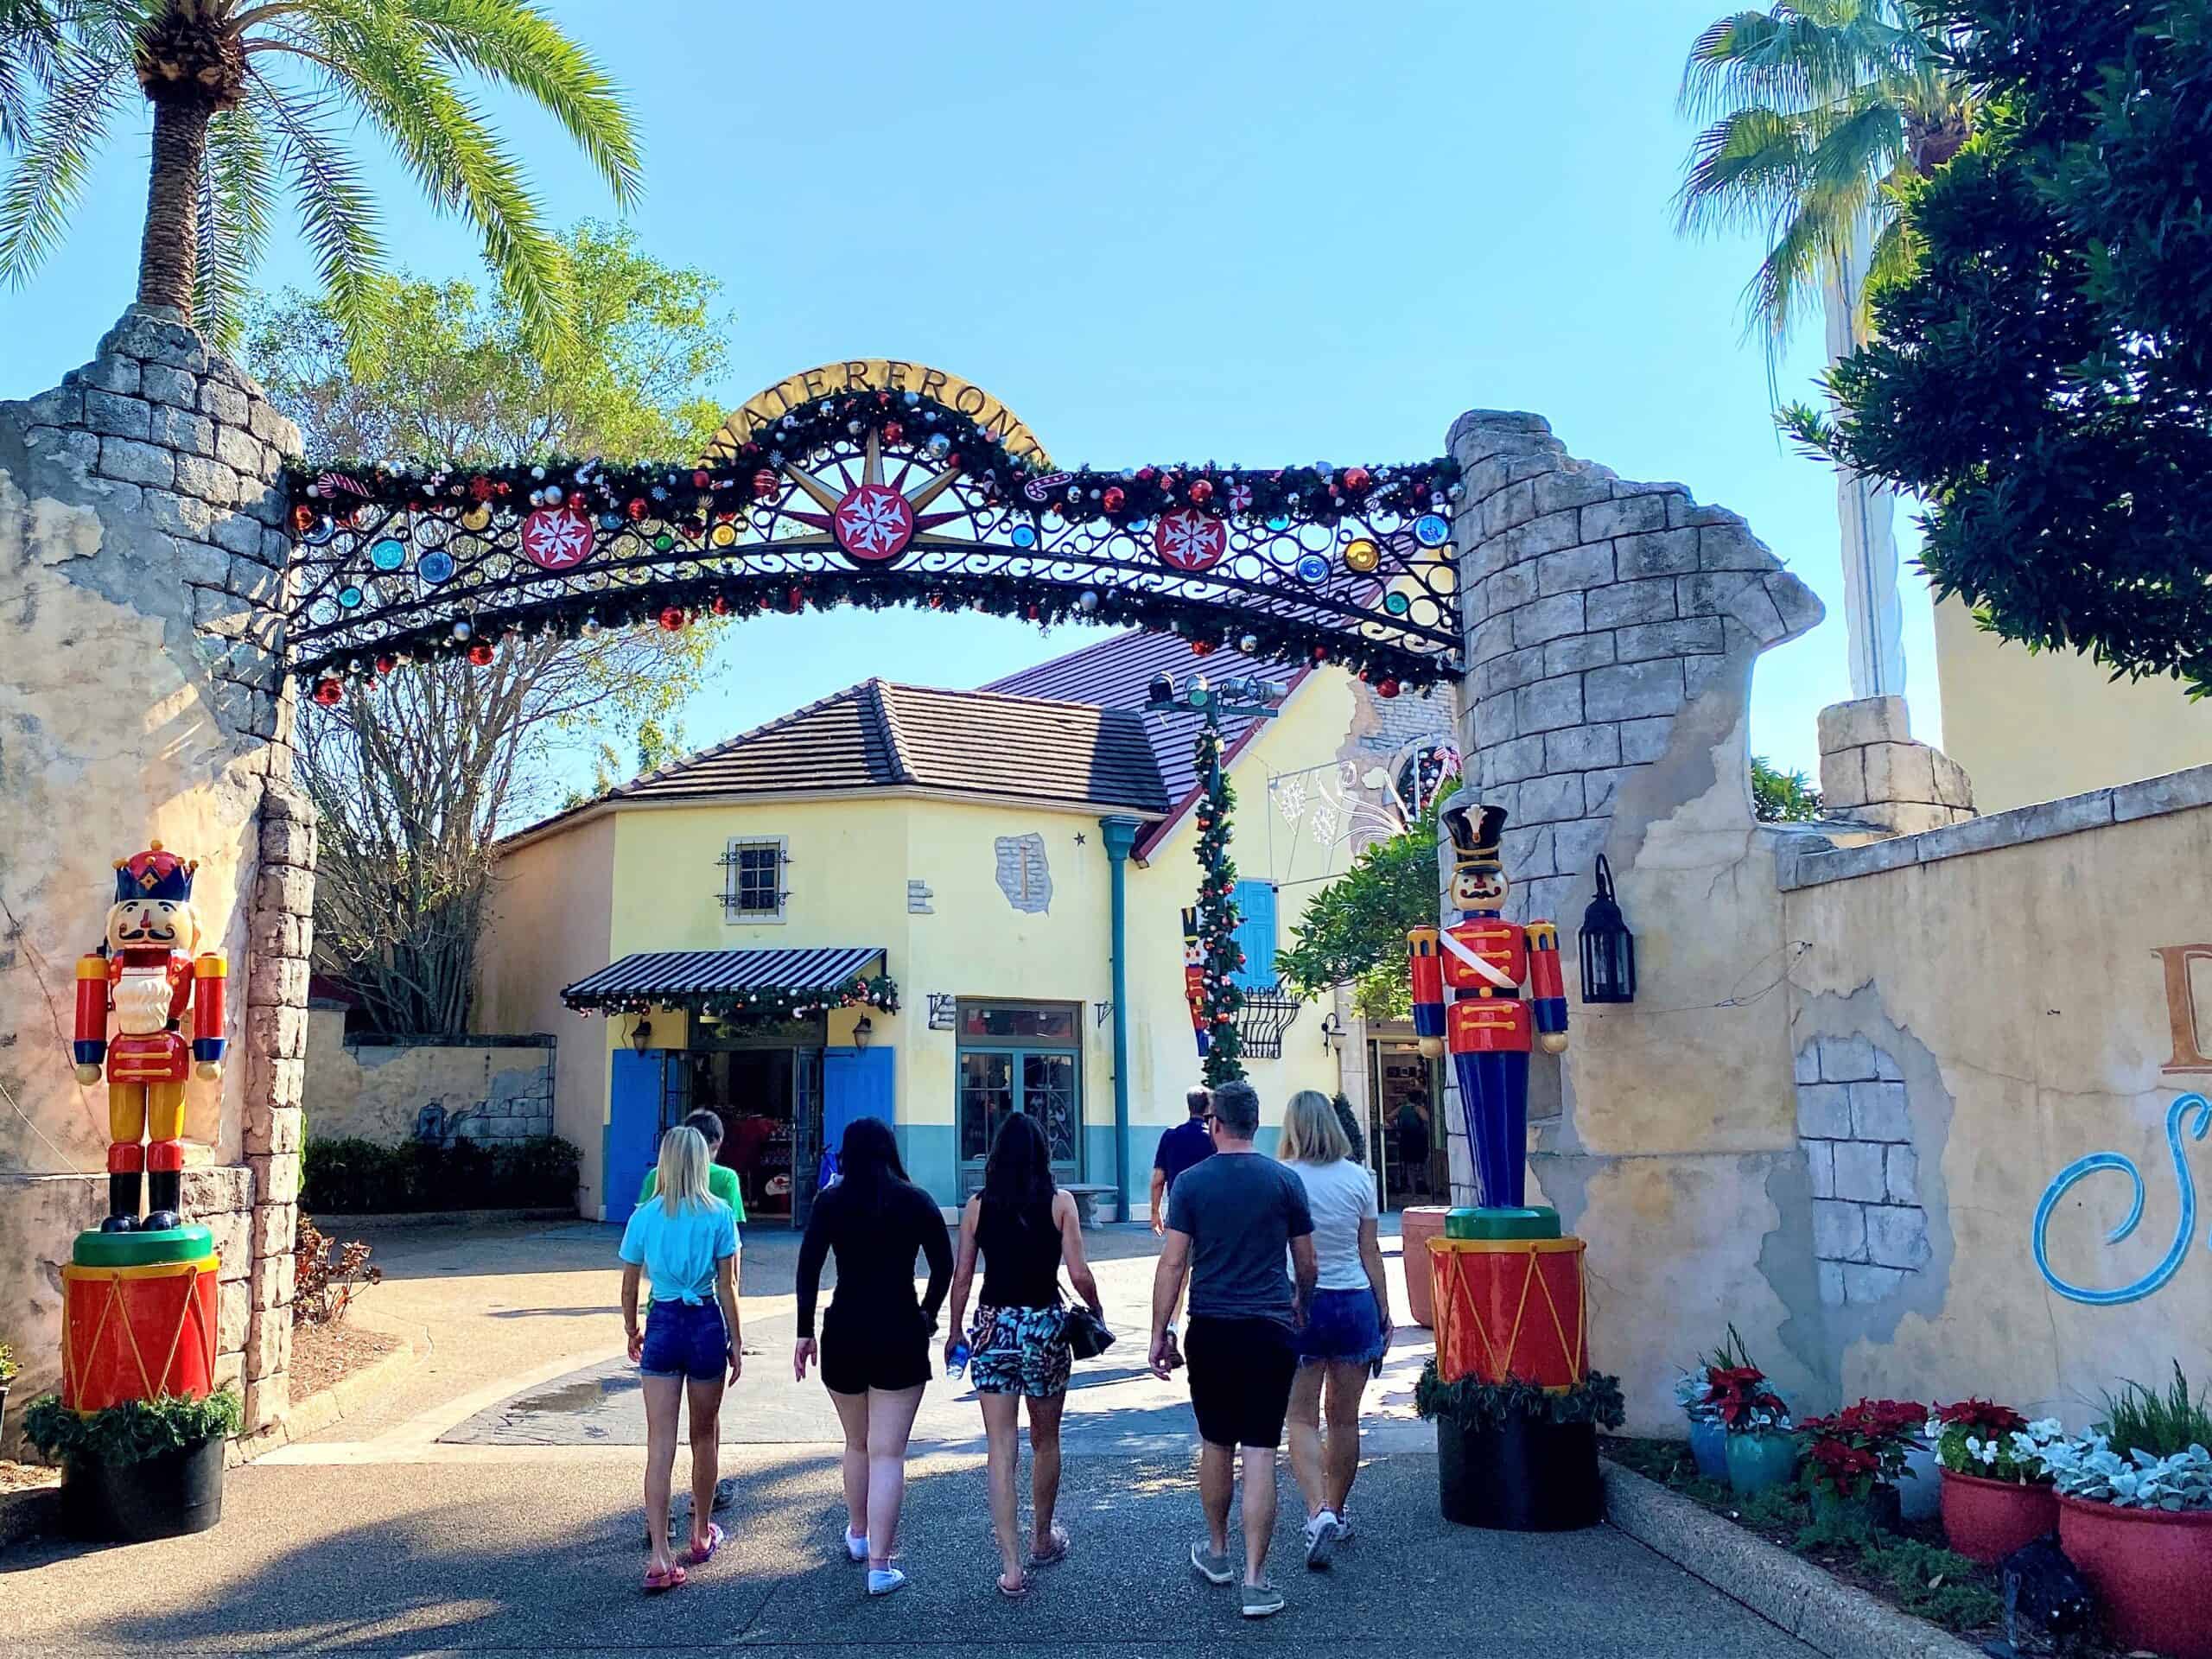 The Waterfront at SeaWorld Orlando is especially festive as a group of five casually dressed adults with their back towards the camera walk through a decorated archway flanked by two large nutcracker decorations. 